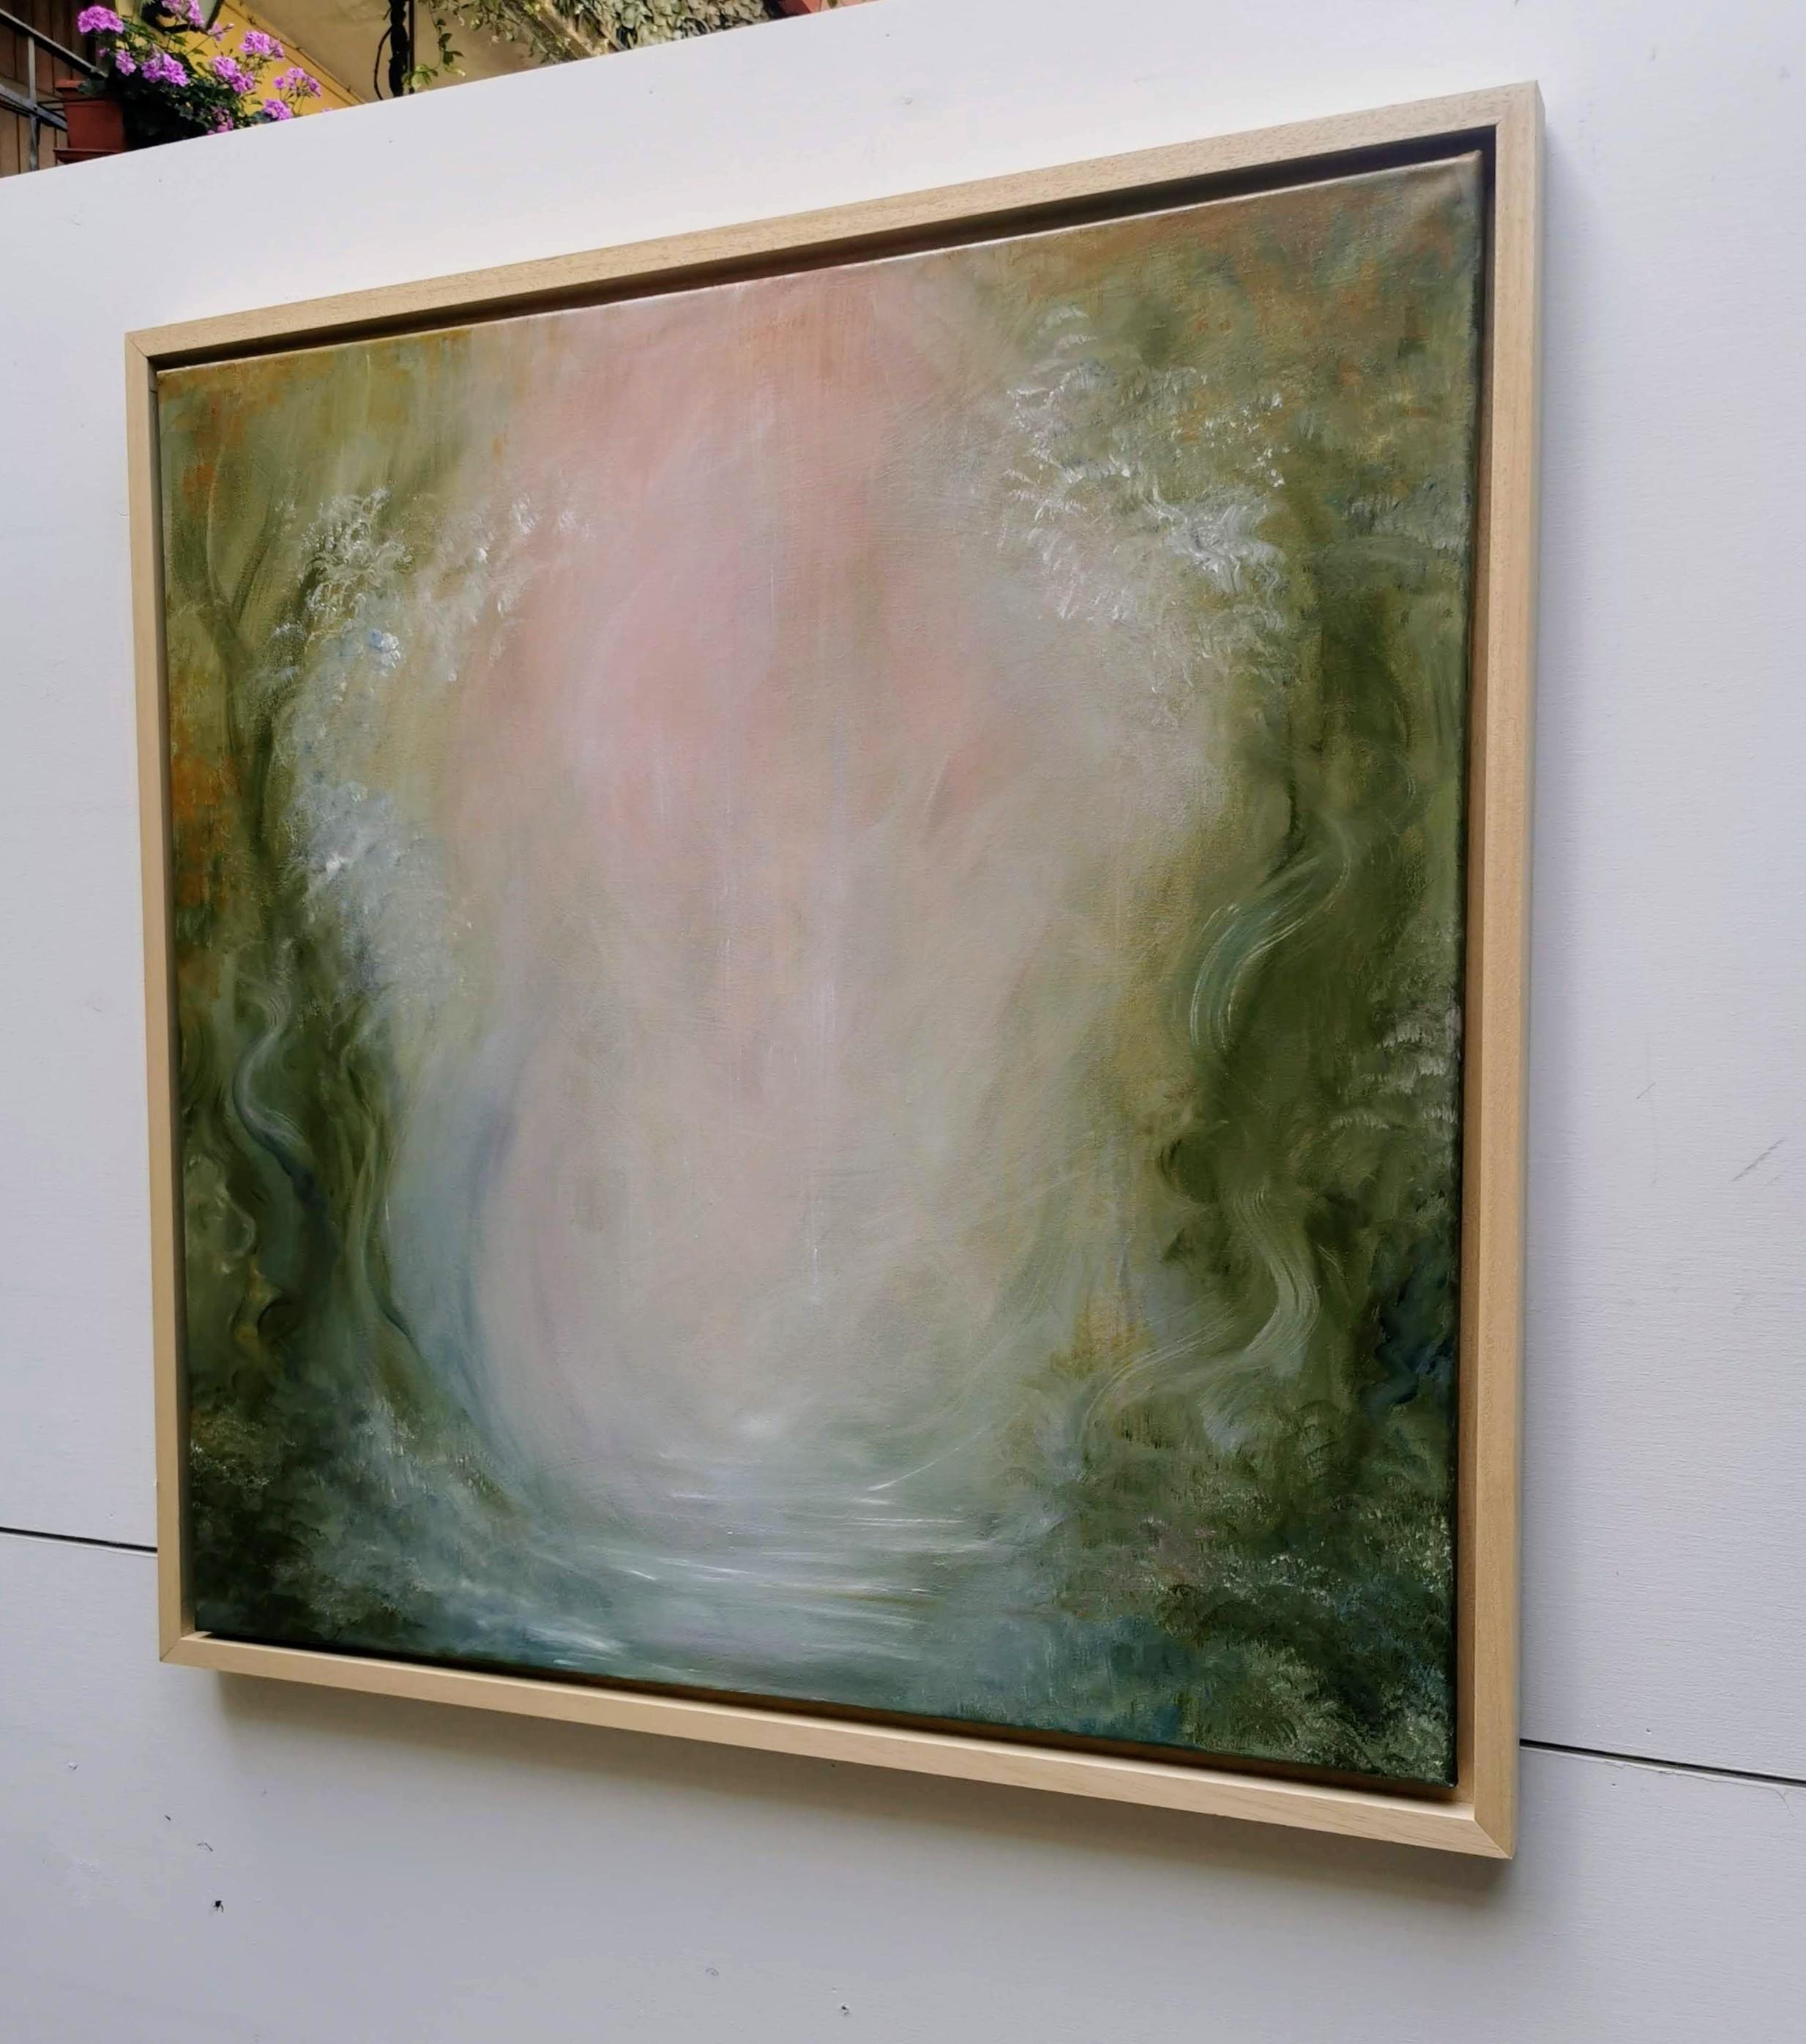 Favola - Soft, dreamy abstract landscape painting - Brown Abstract Painting by Jennifer L. Baker